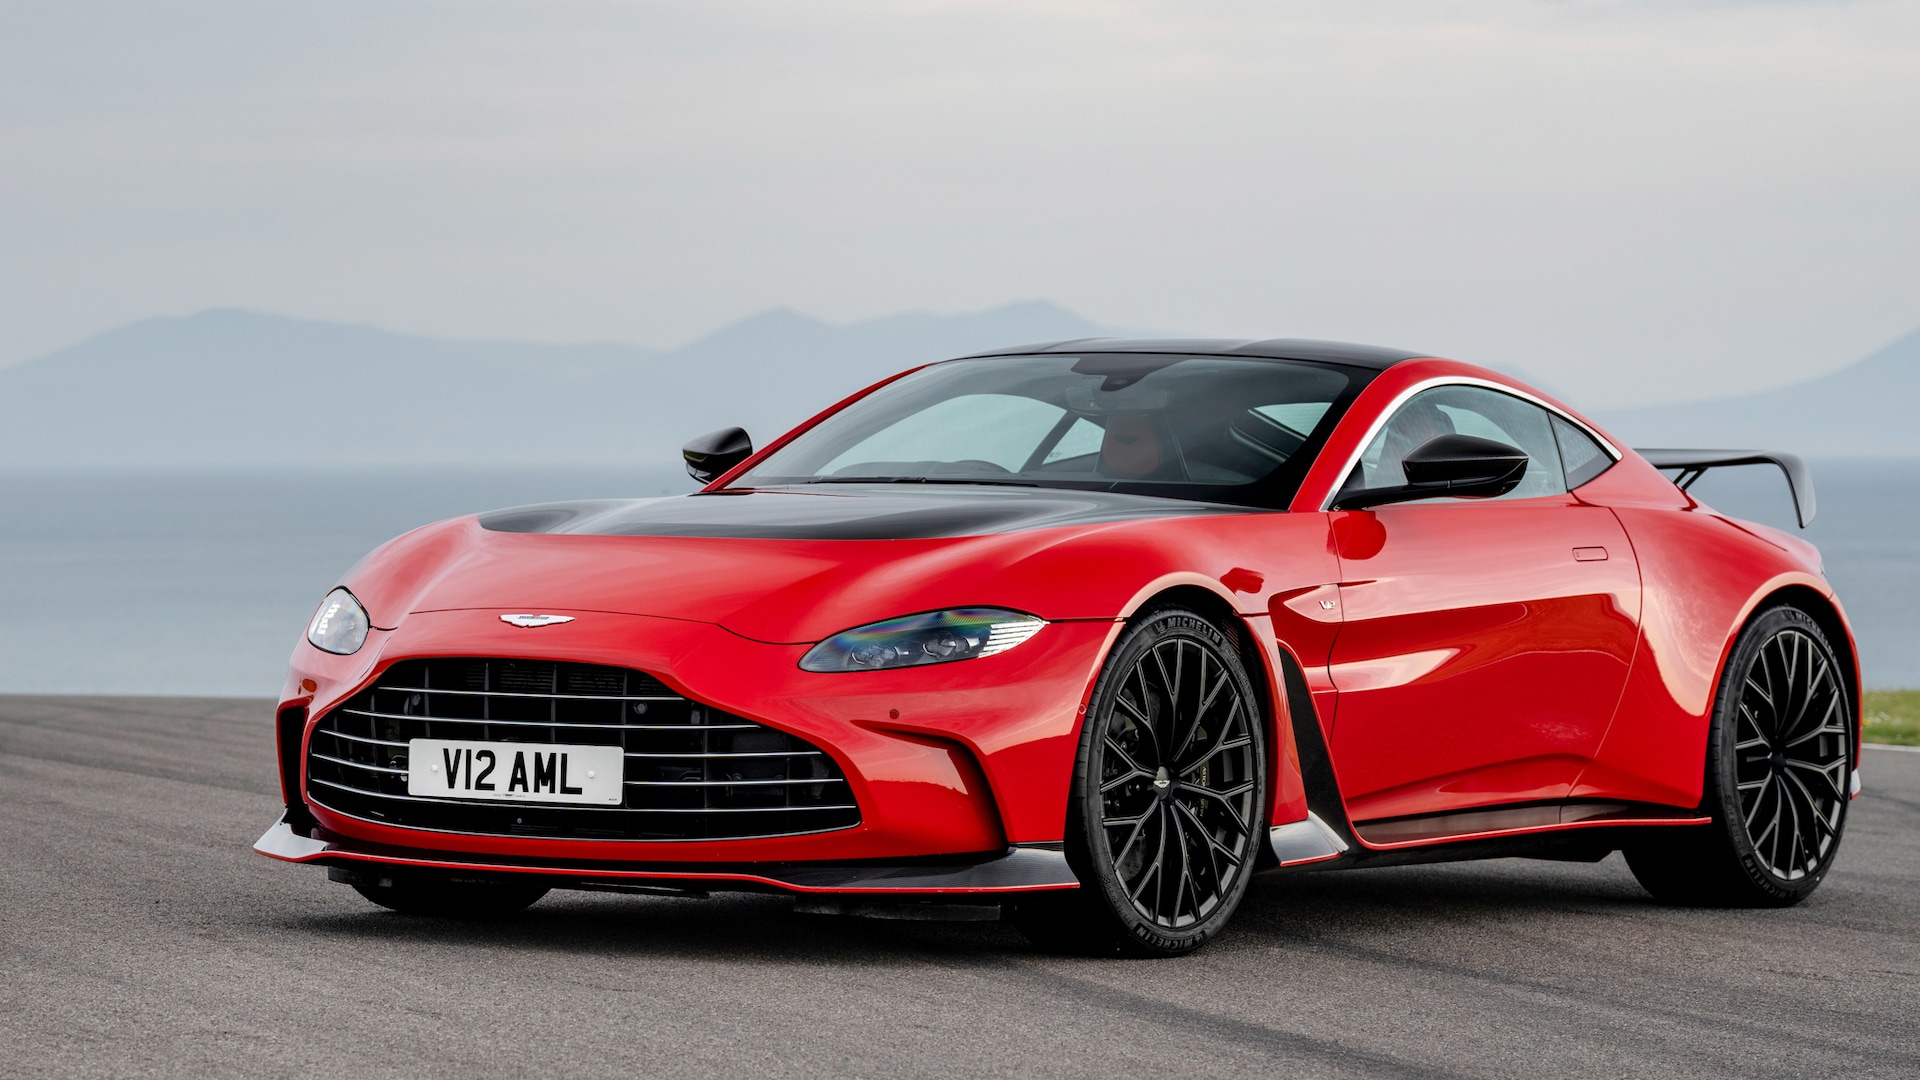 2023 Aston Martin Vantage Prices, Reviews, and Photos - MotorTrend